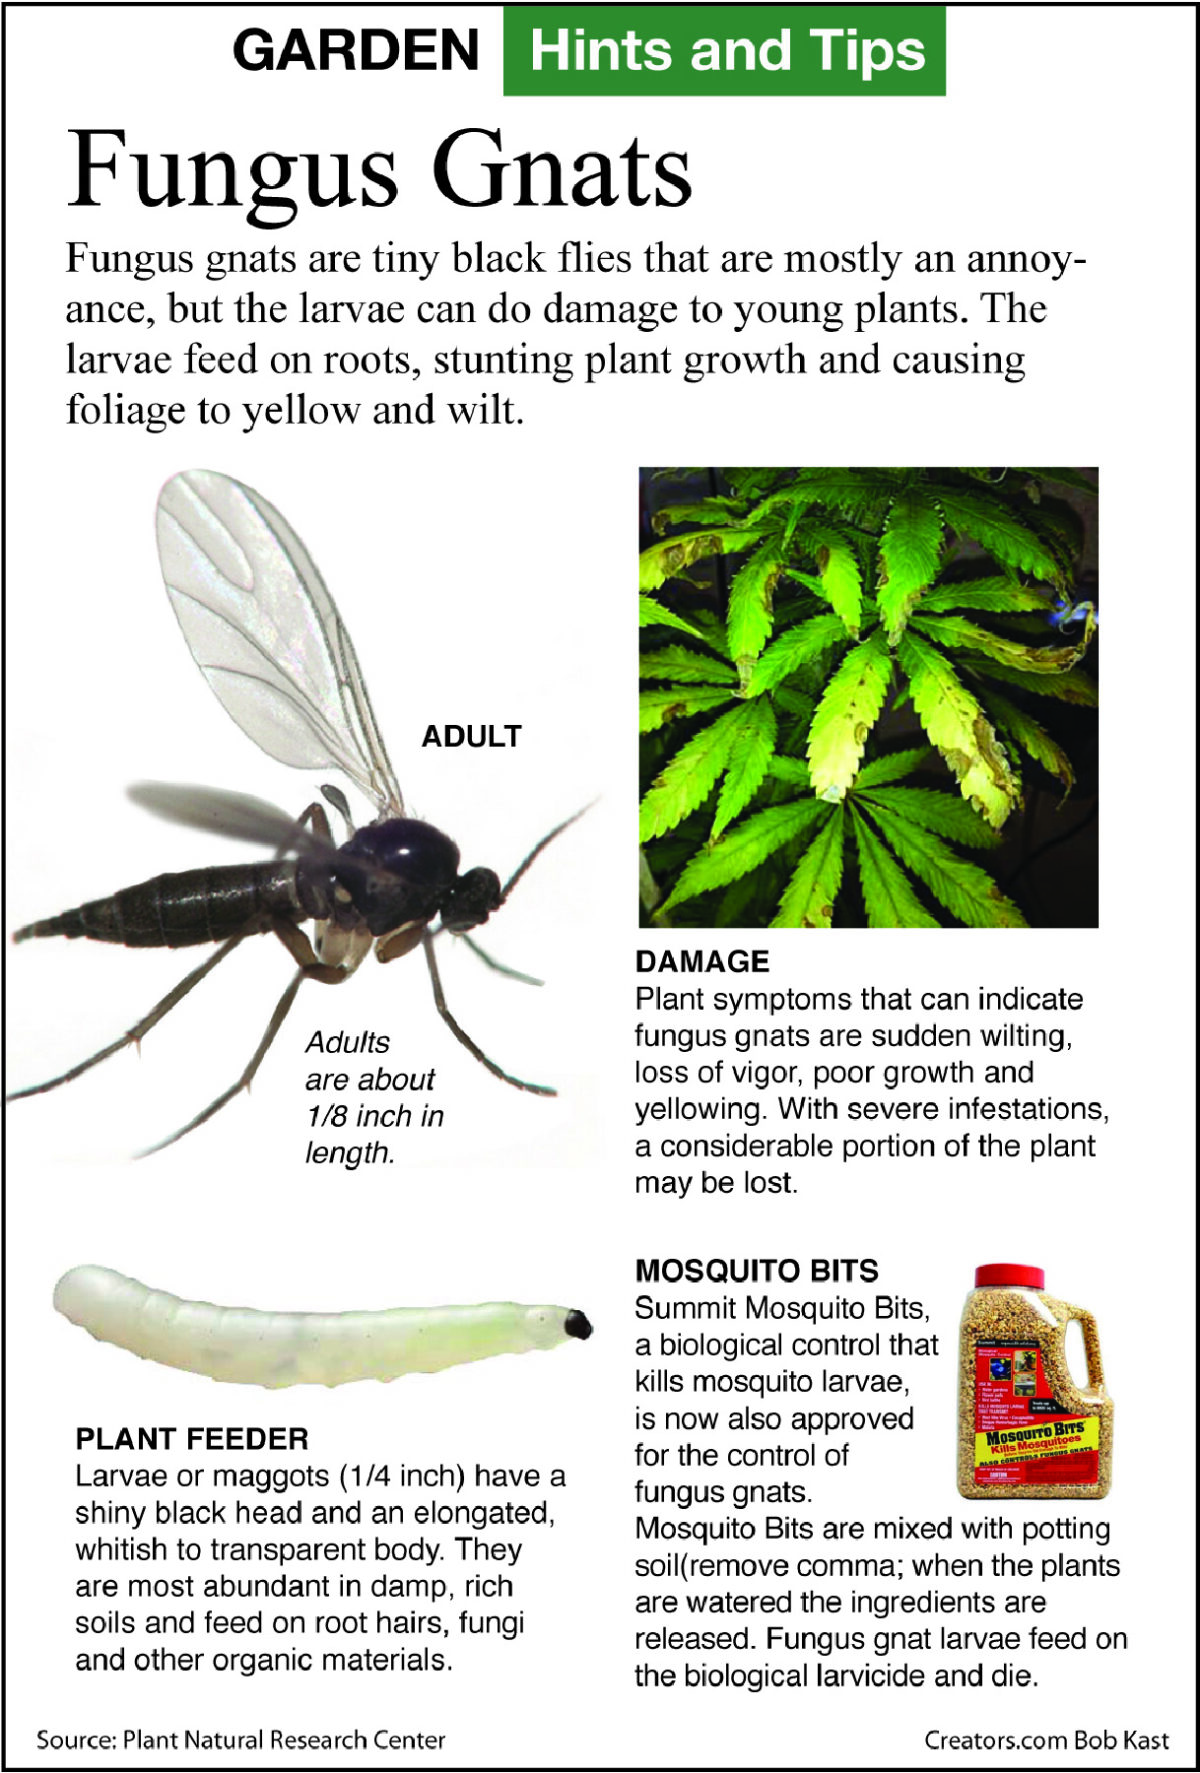 What Are Fungus Gnats & How to Kill Them? - WeedSeedShop